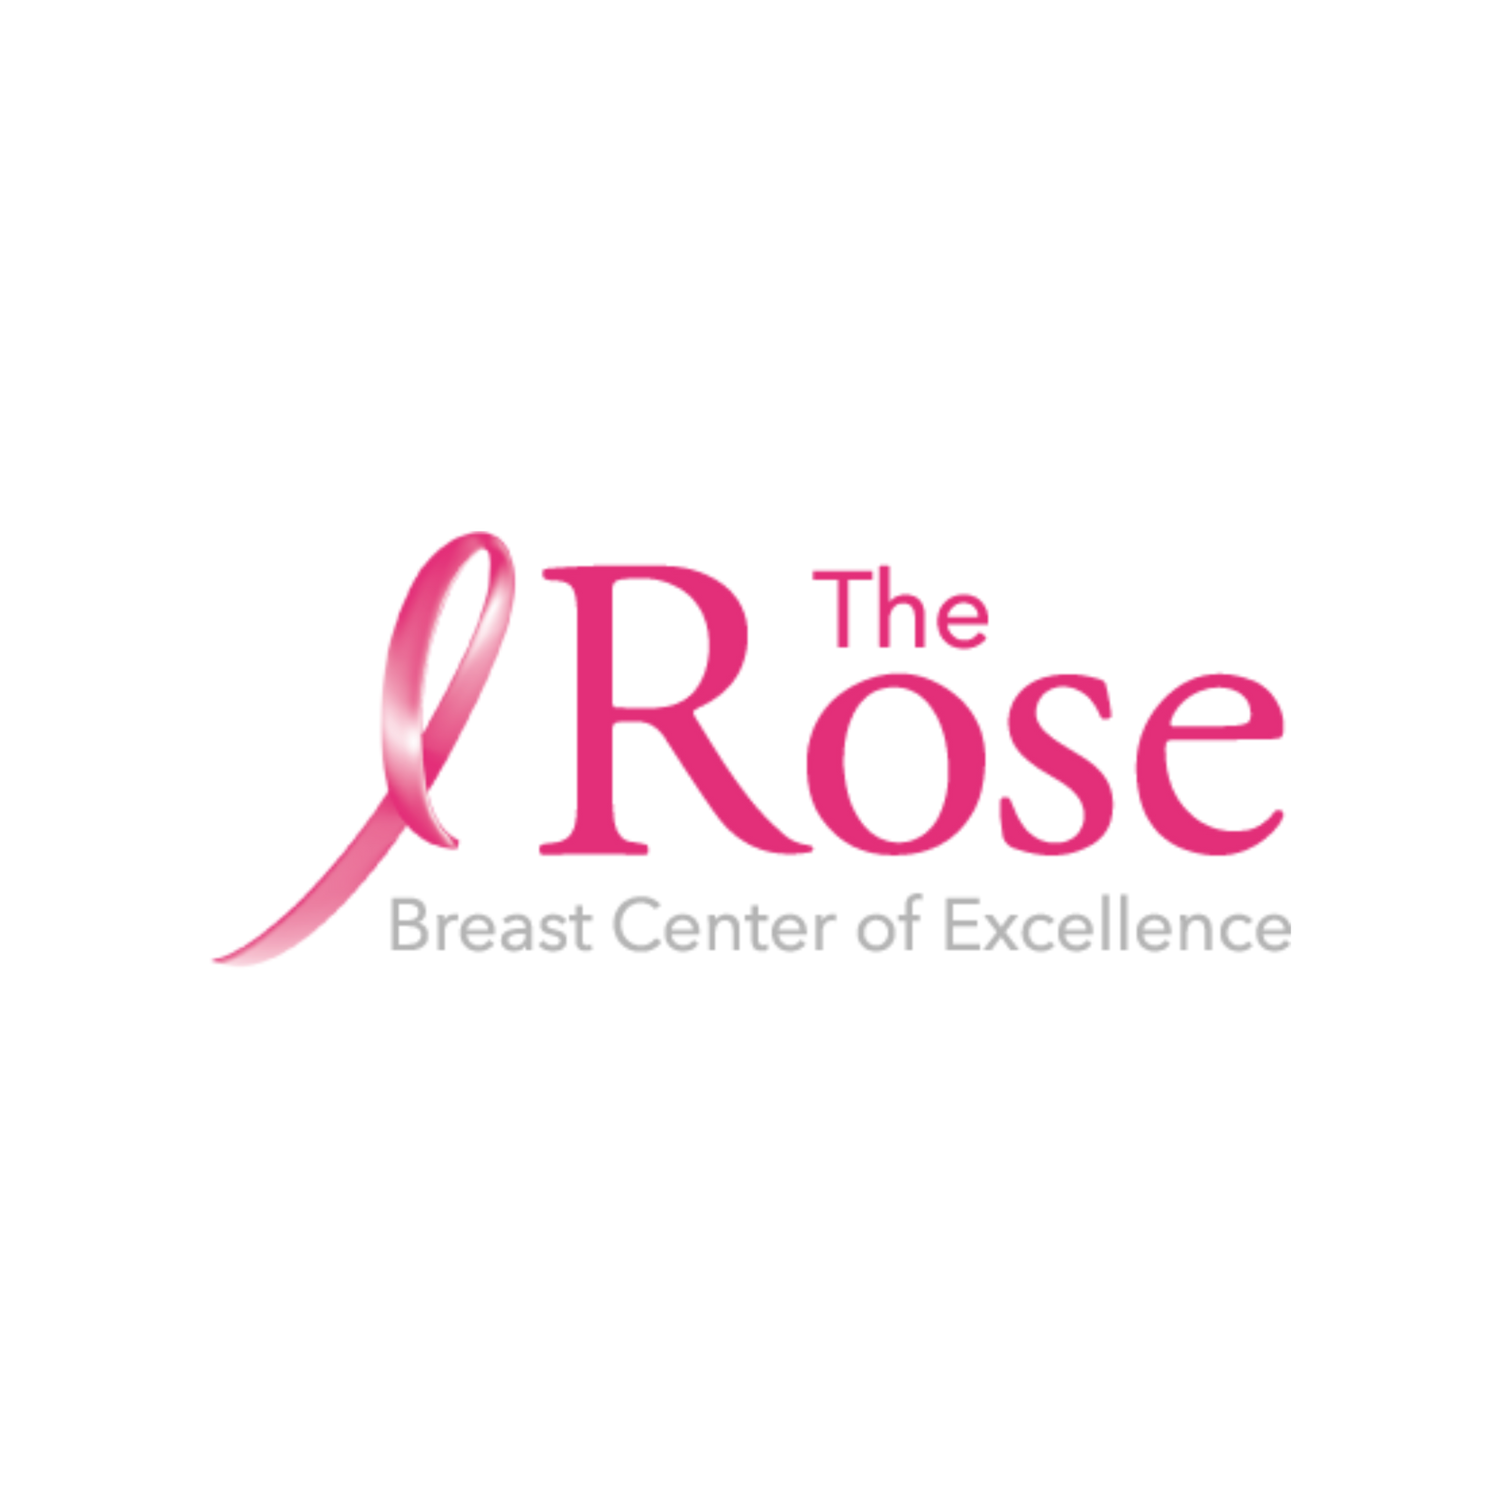 The Rose Breast Center of Excellence